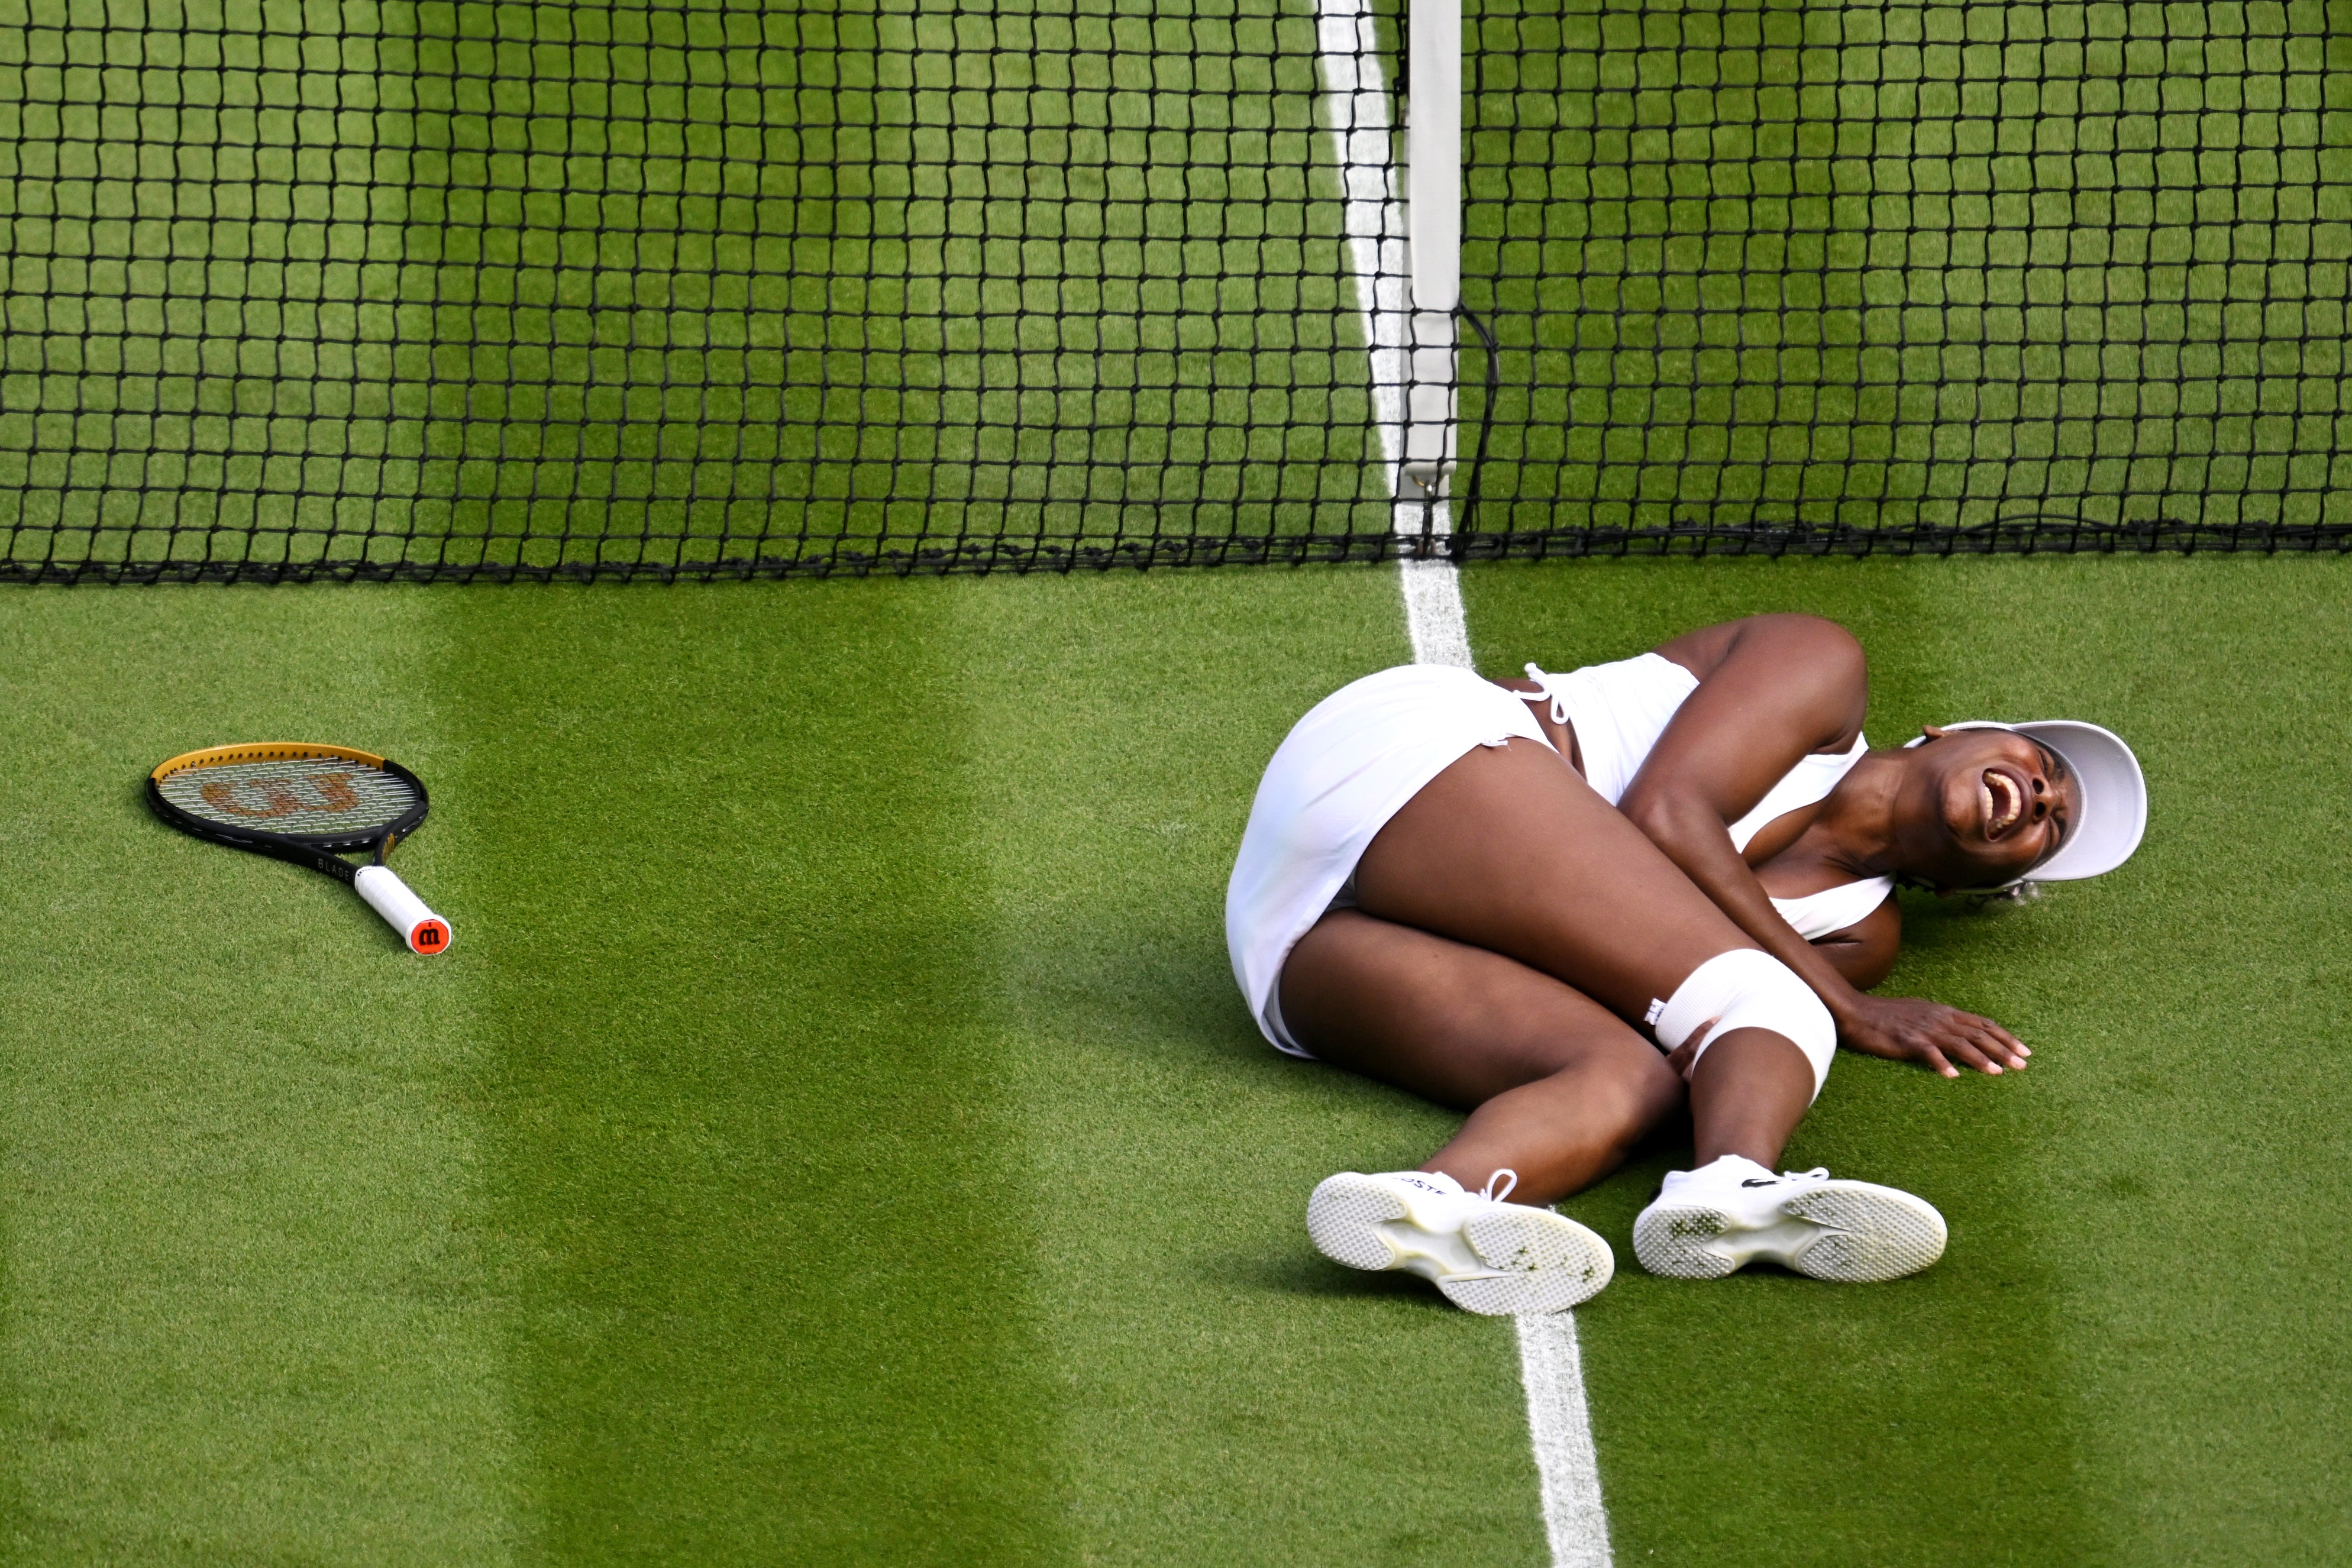 The five-time Wimbledon champion slipped and injured her knee, but chose not to retire